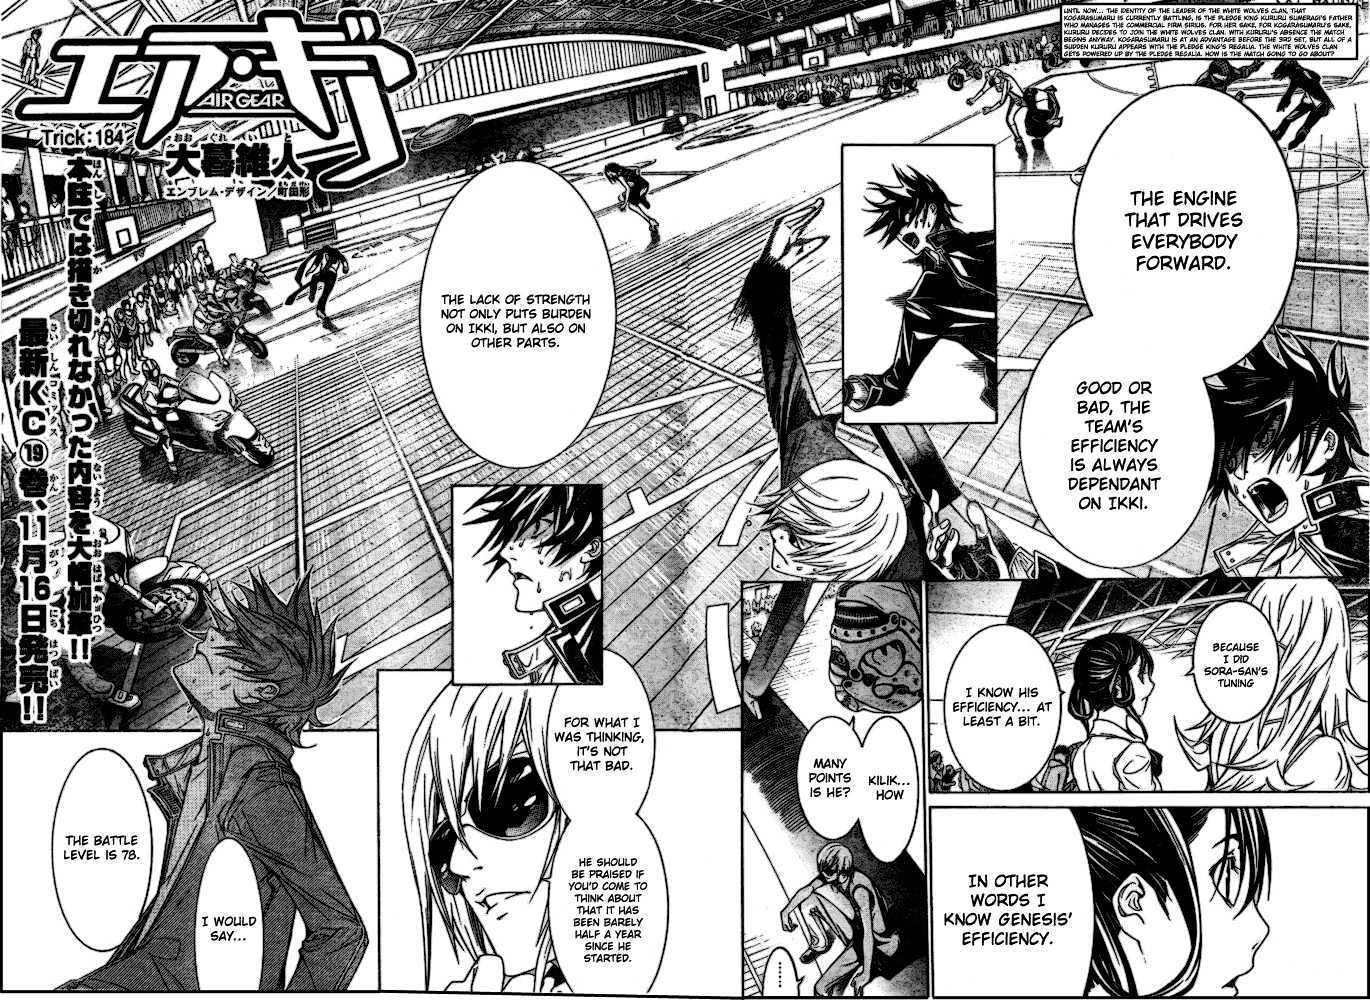 Air Gear Vol.20 Chapter 184 : Trick:184 - Picture 3